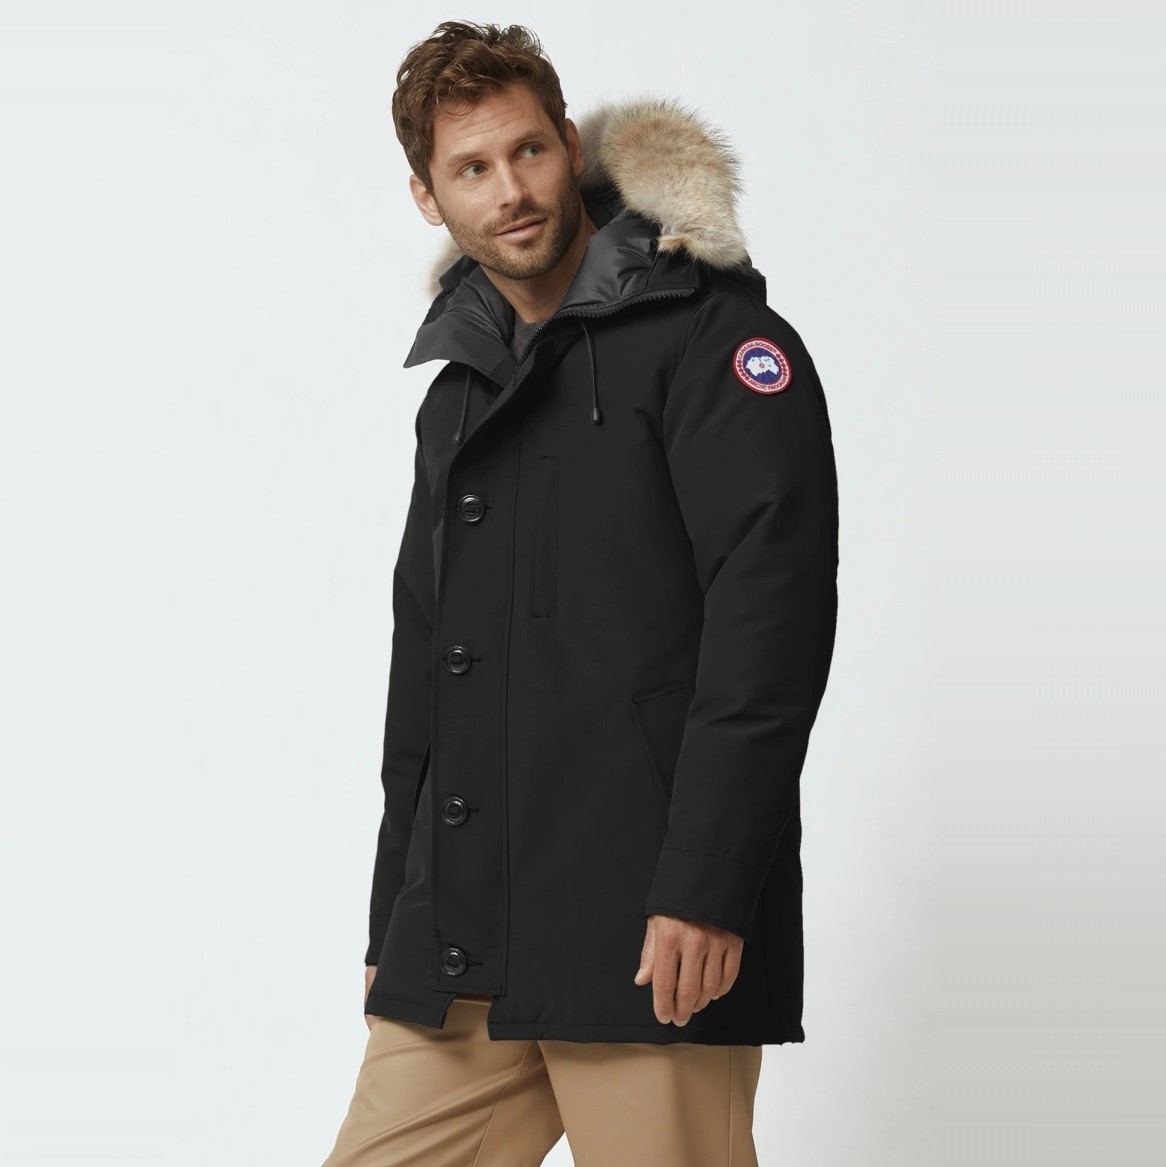 10 Best Jacket Brands - Must Read This Before Buying